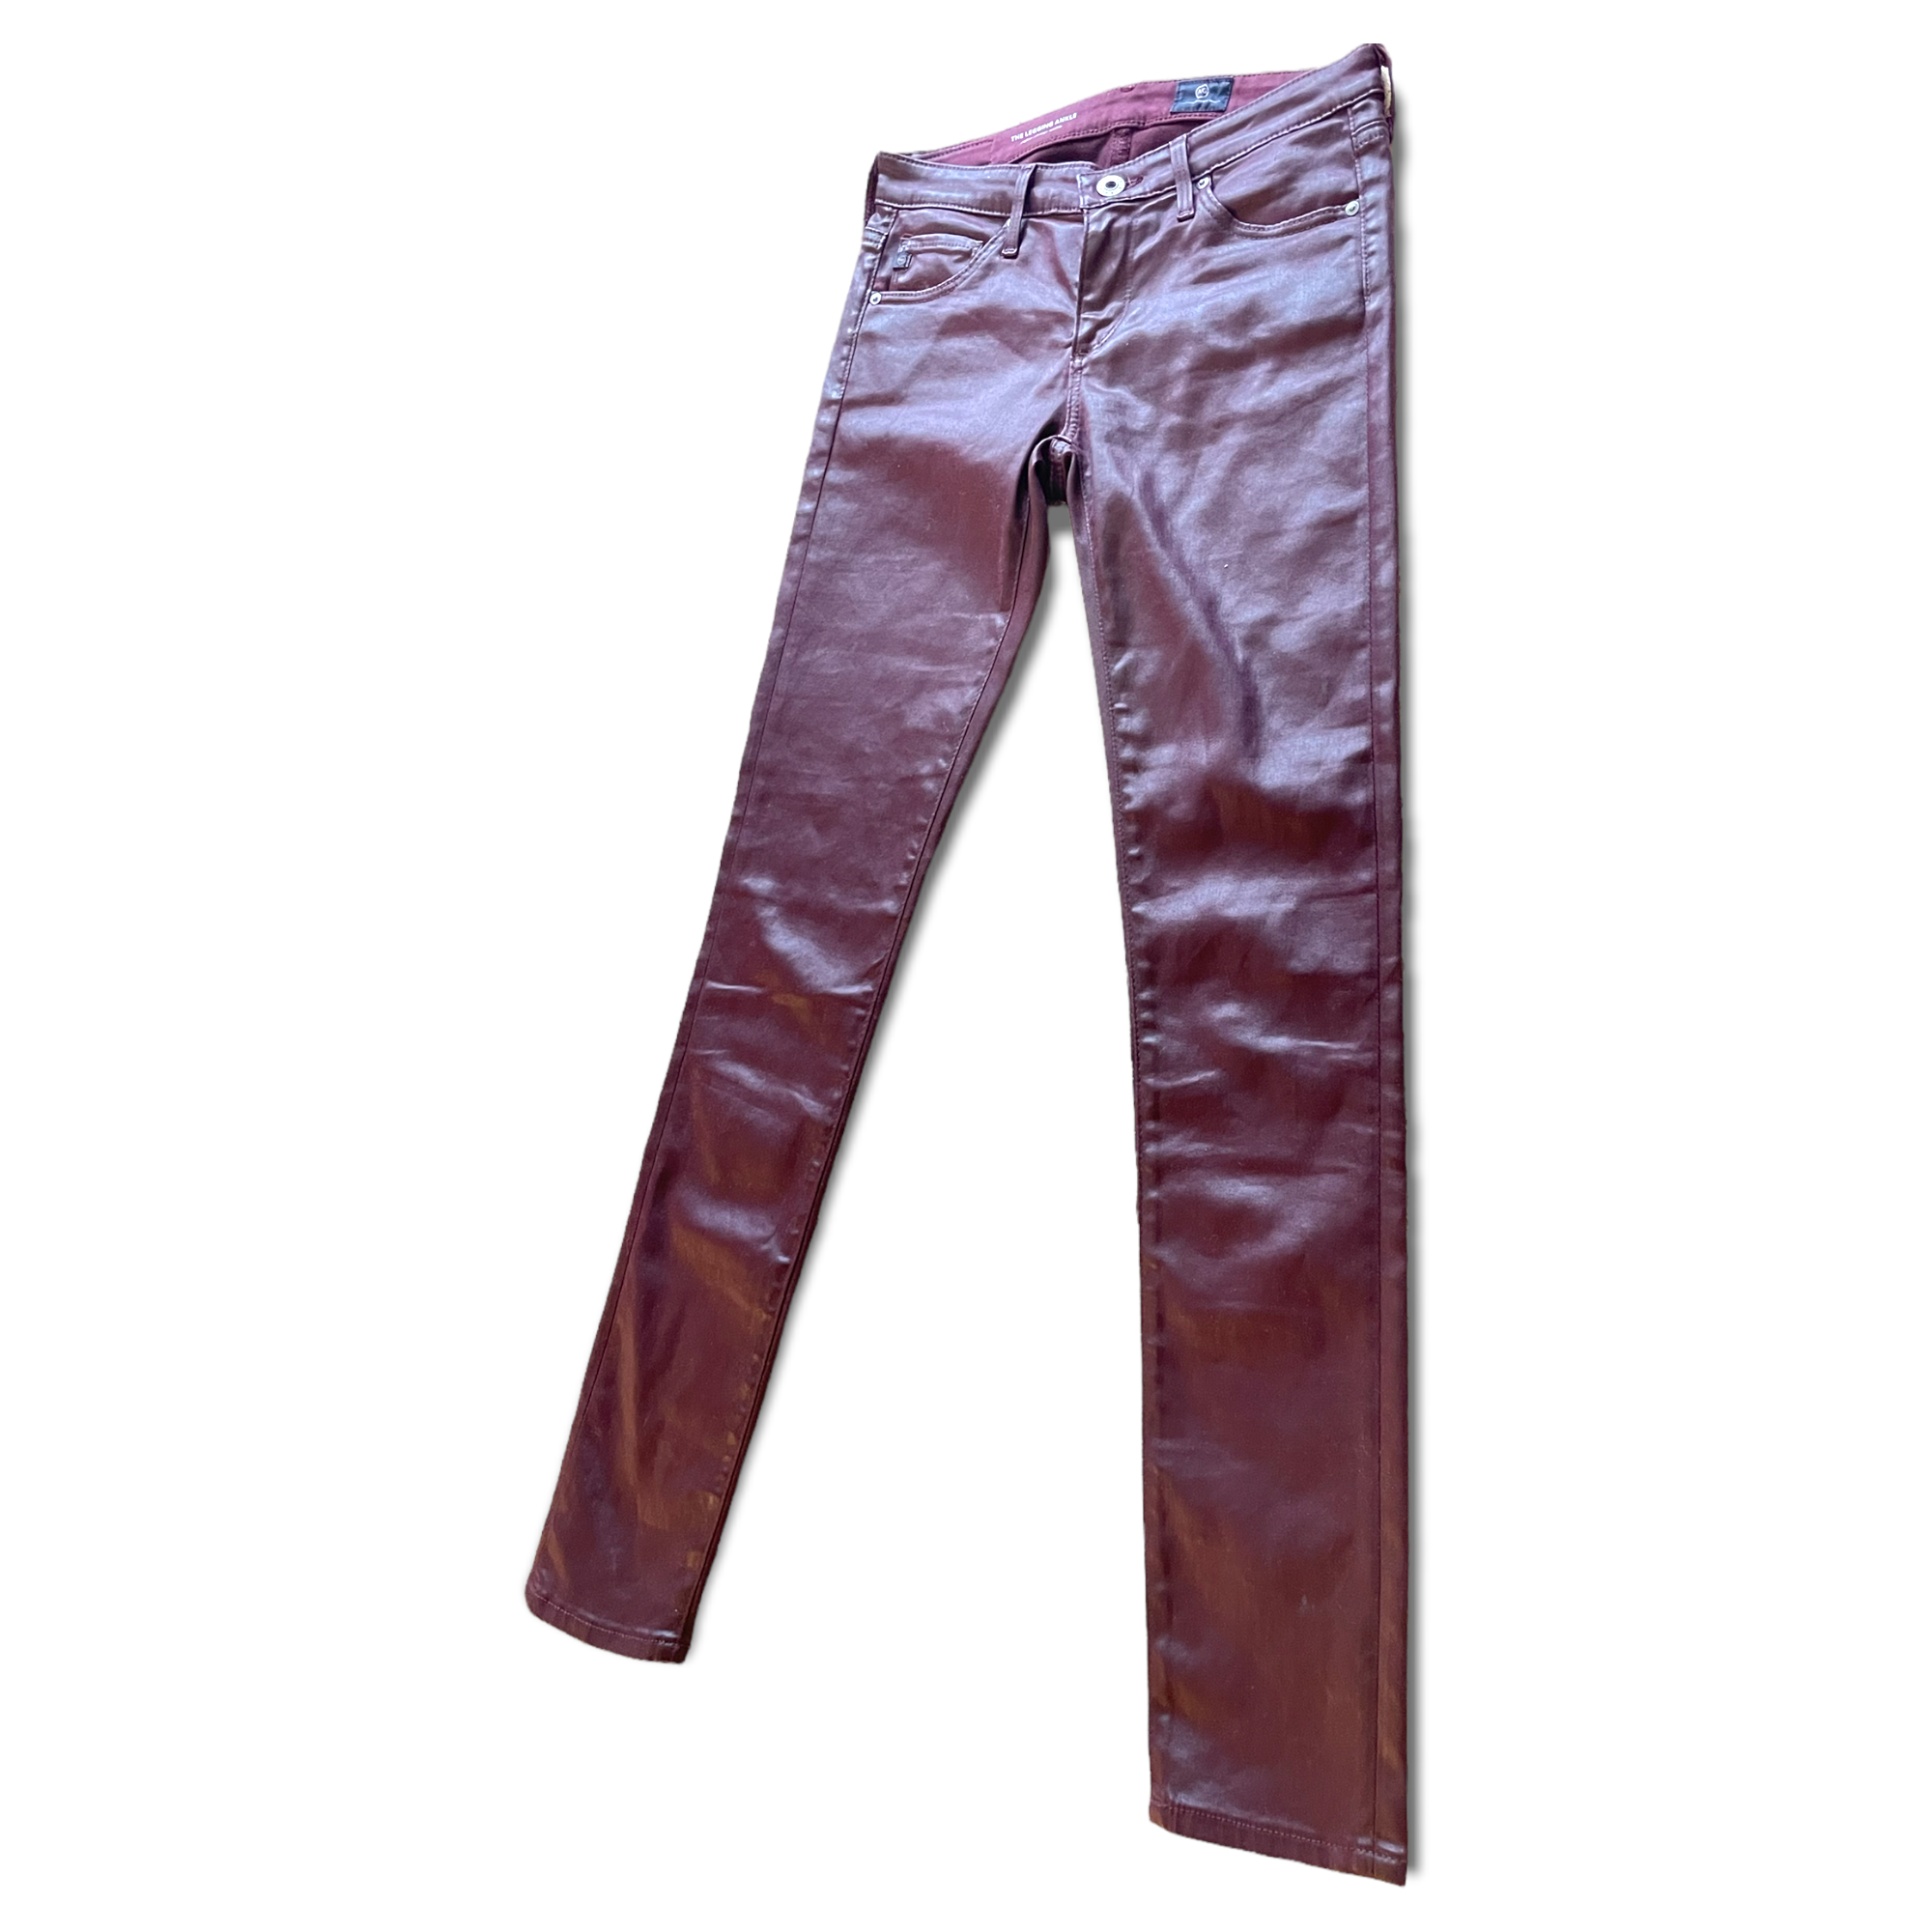 Womens AG Adriano Goldschmeid Pants Super Skinny Ankle Pants |Size: 24R|